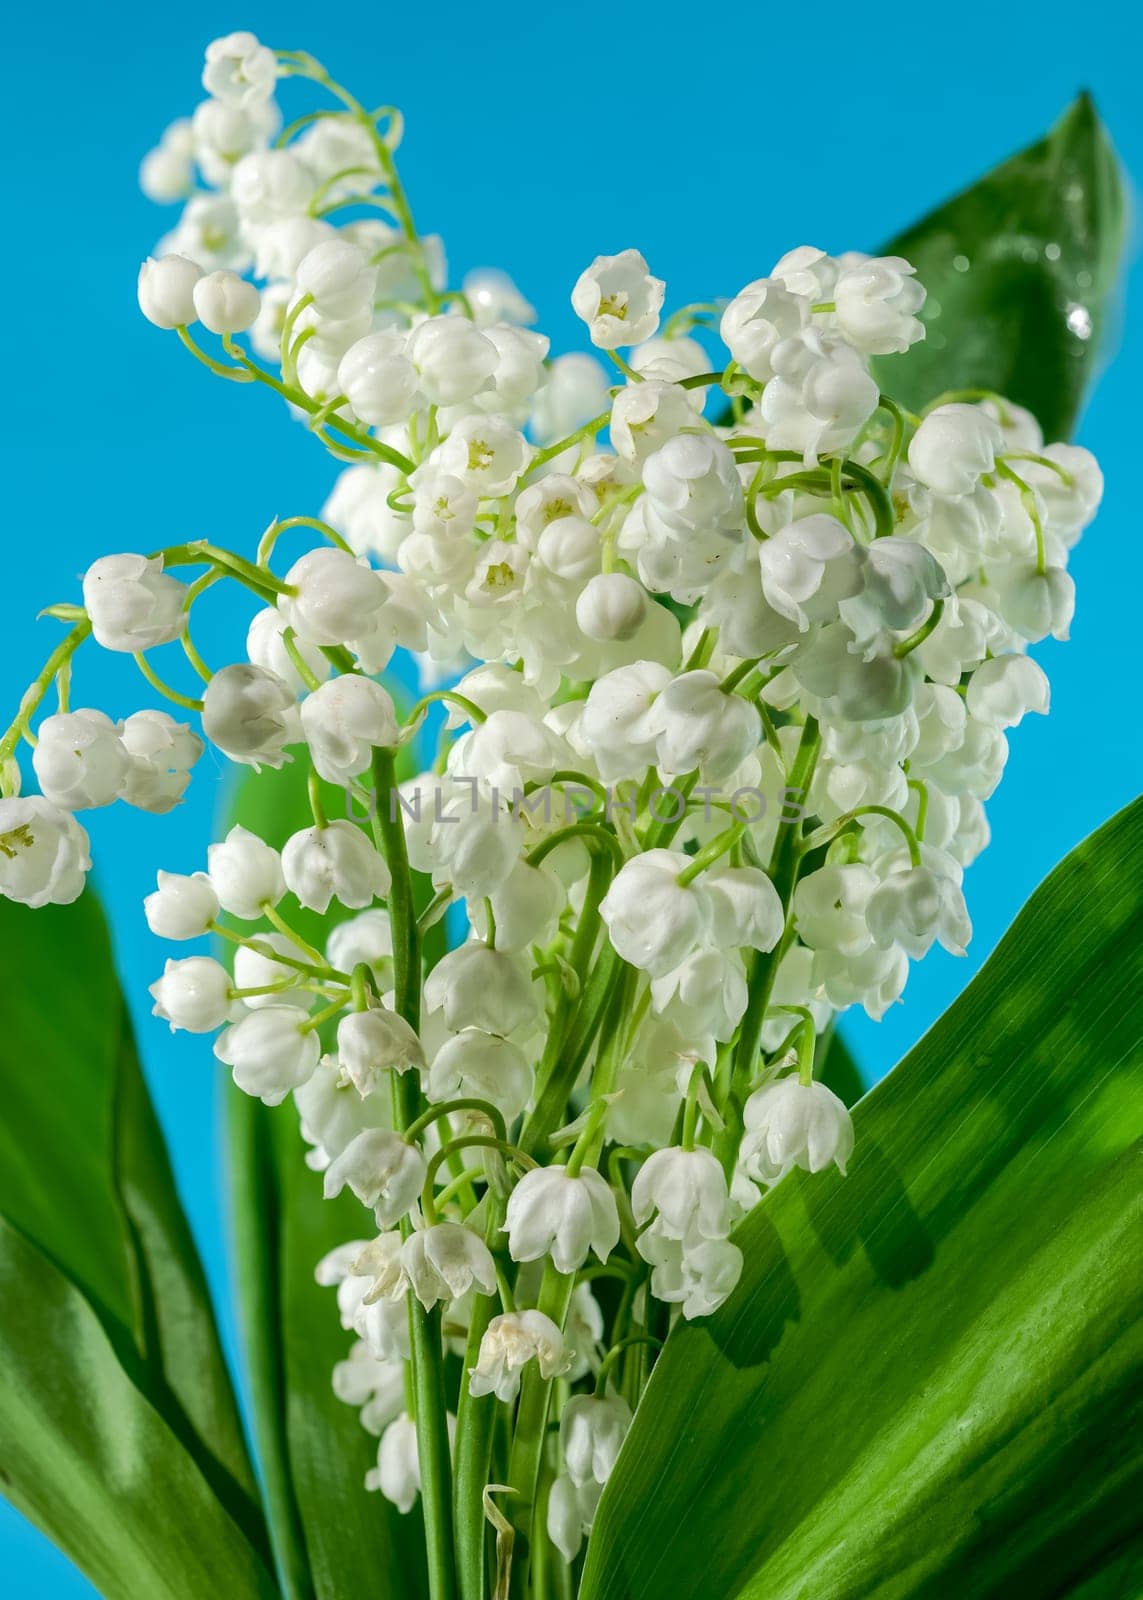 Blooming Lily of the valley flowers on a blue background by Multipedia